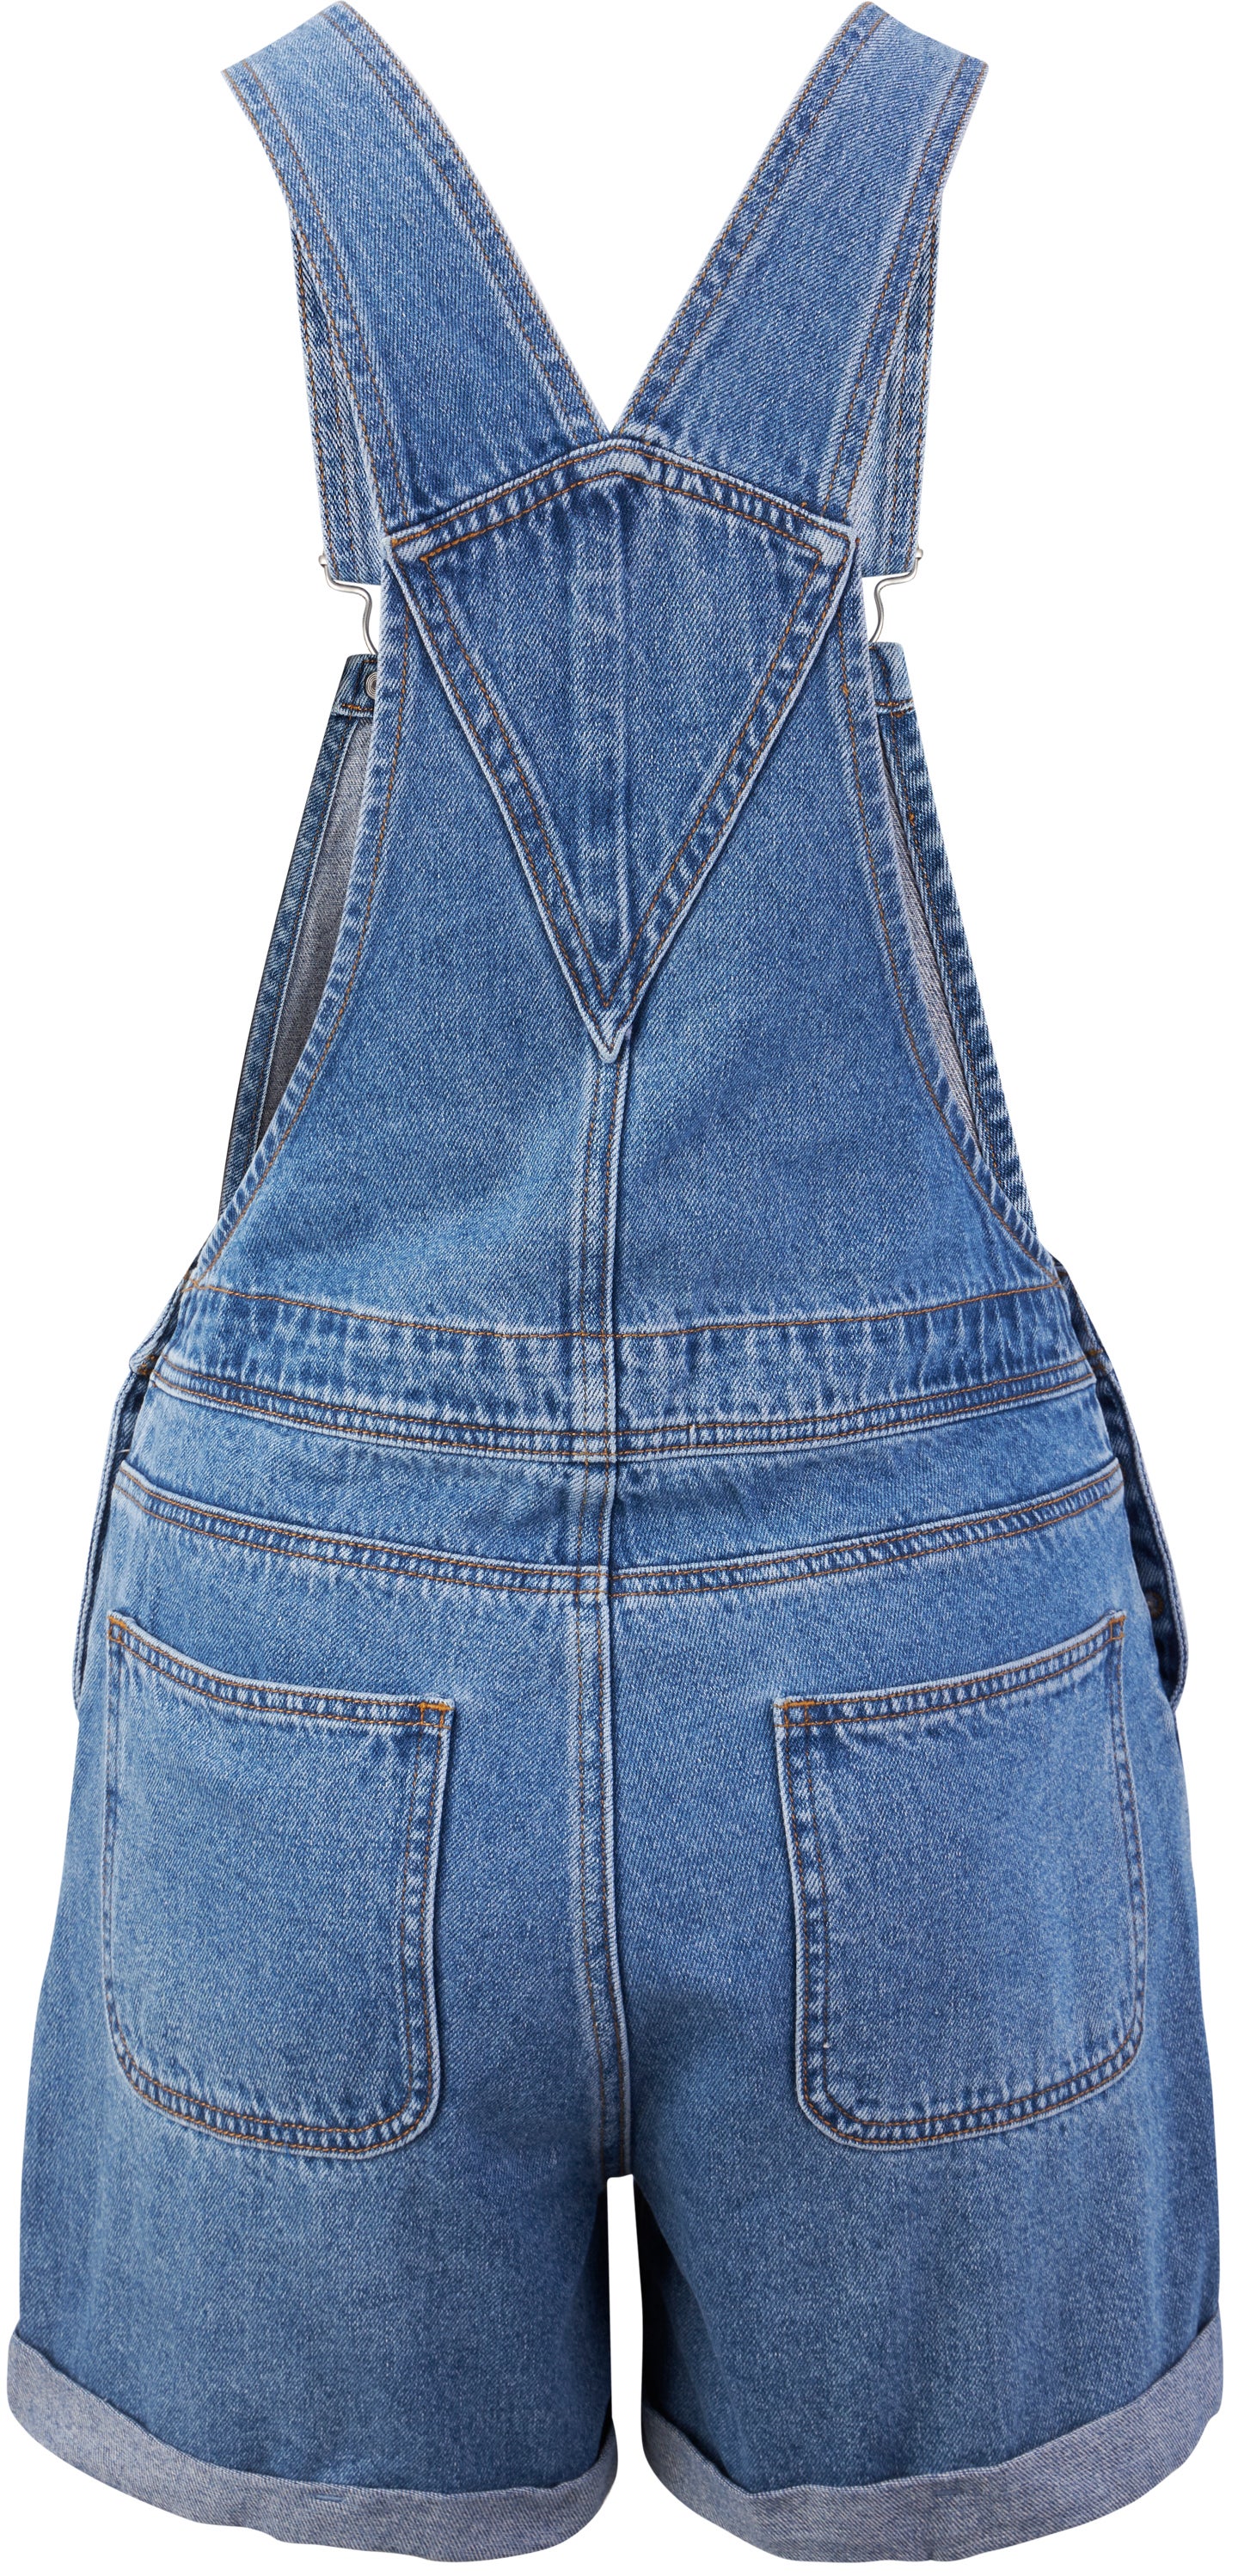 Missguided Tall Distressed Denim Overall Short | Denim dungaree shorts,  Latest fashion clothes, Jeans for short women